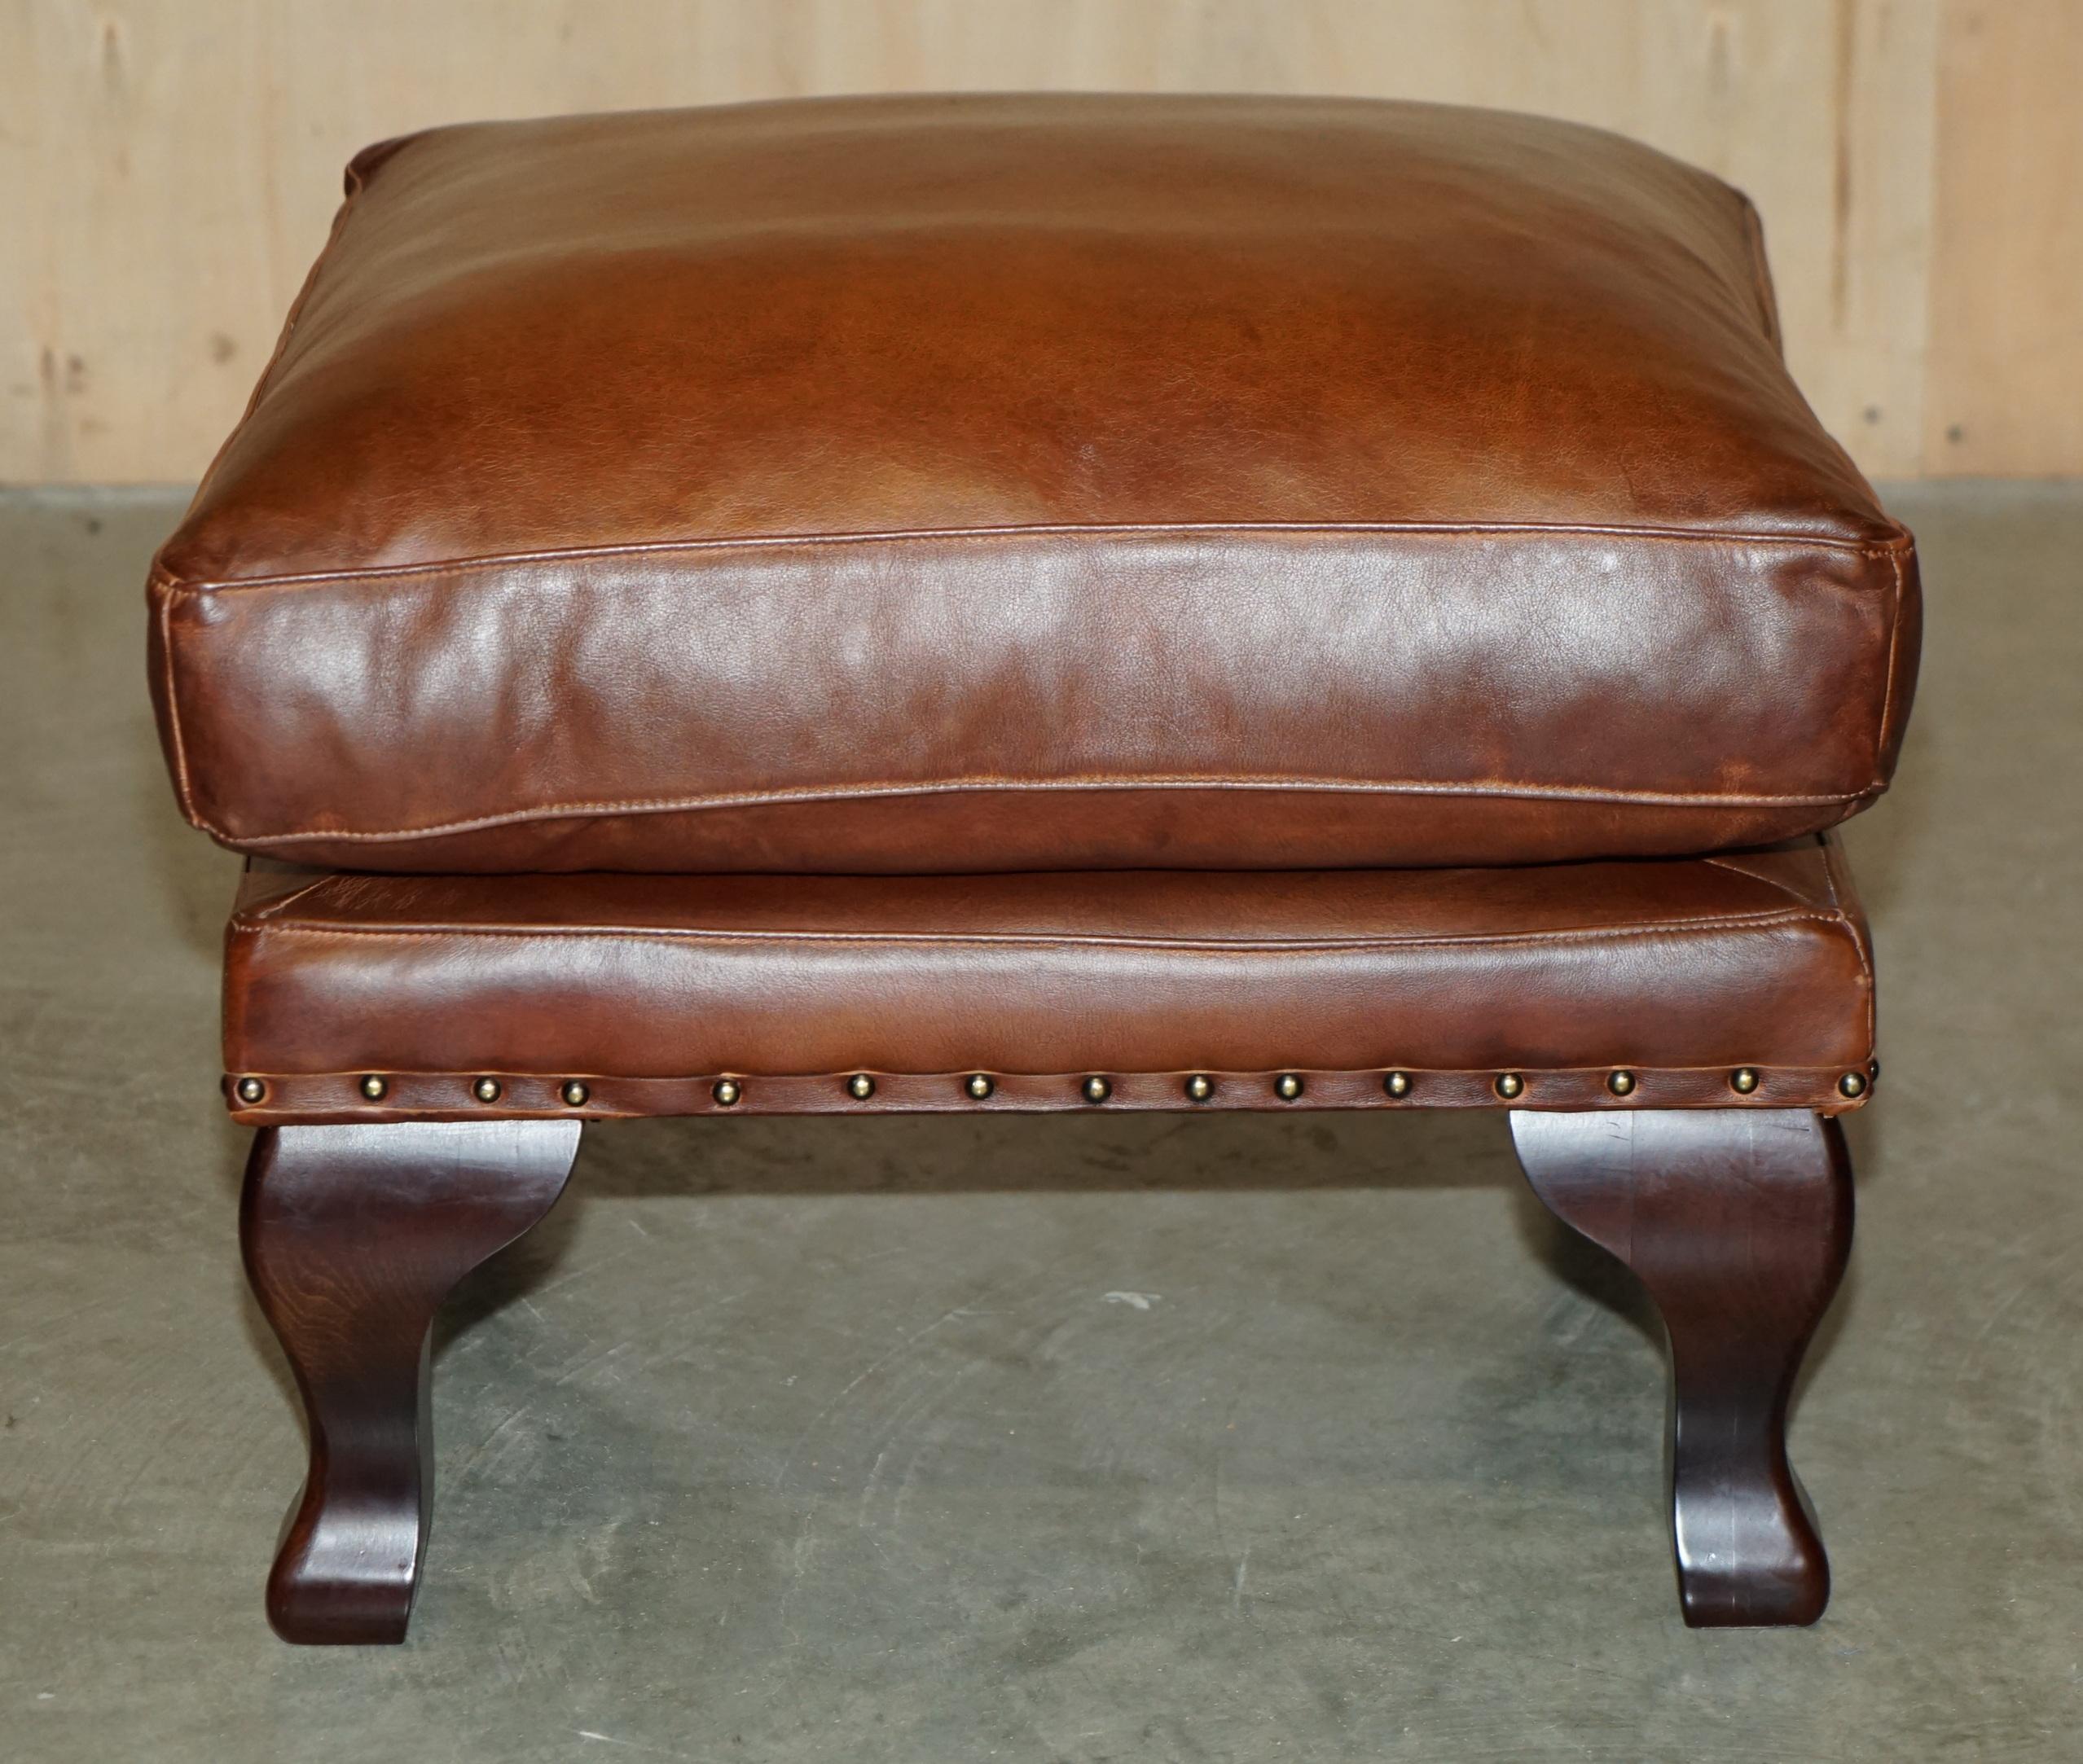 Leather TETRAD BROWN LEATHER LARGE FOOTSTOOL LARGE ENoUGH FOR TWO PEOPLE TO SHARE For Sale